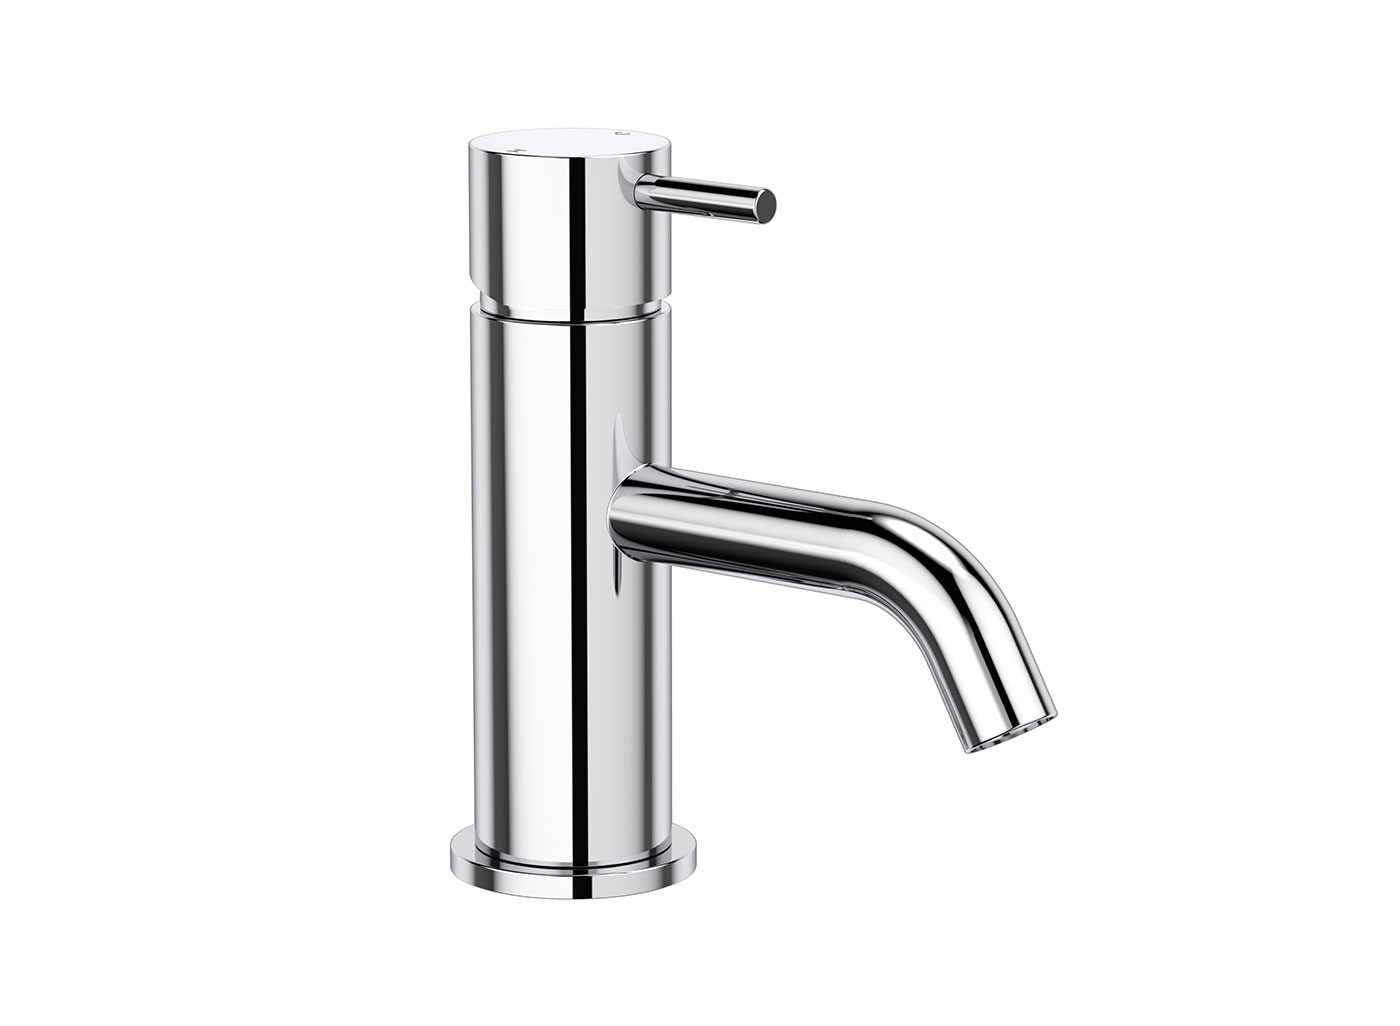 Clark's Round Pin Basin Mixer is a style you'll love at a price you'll love even more.